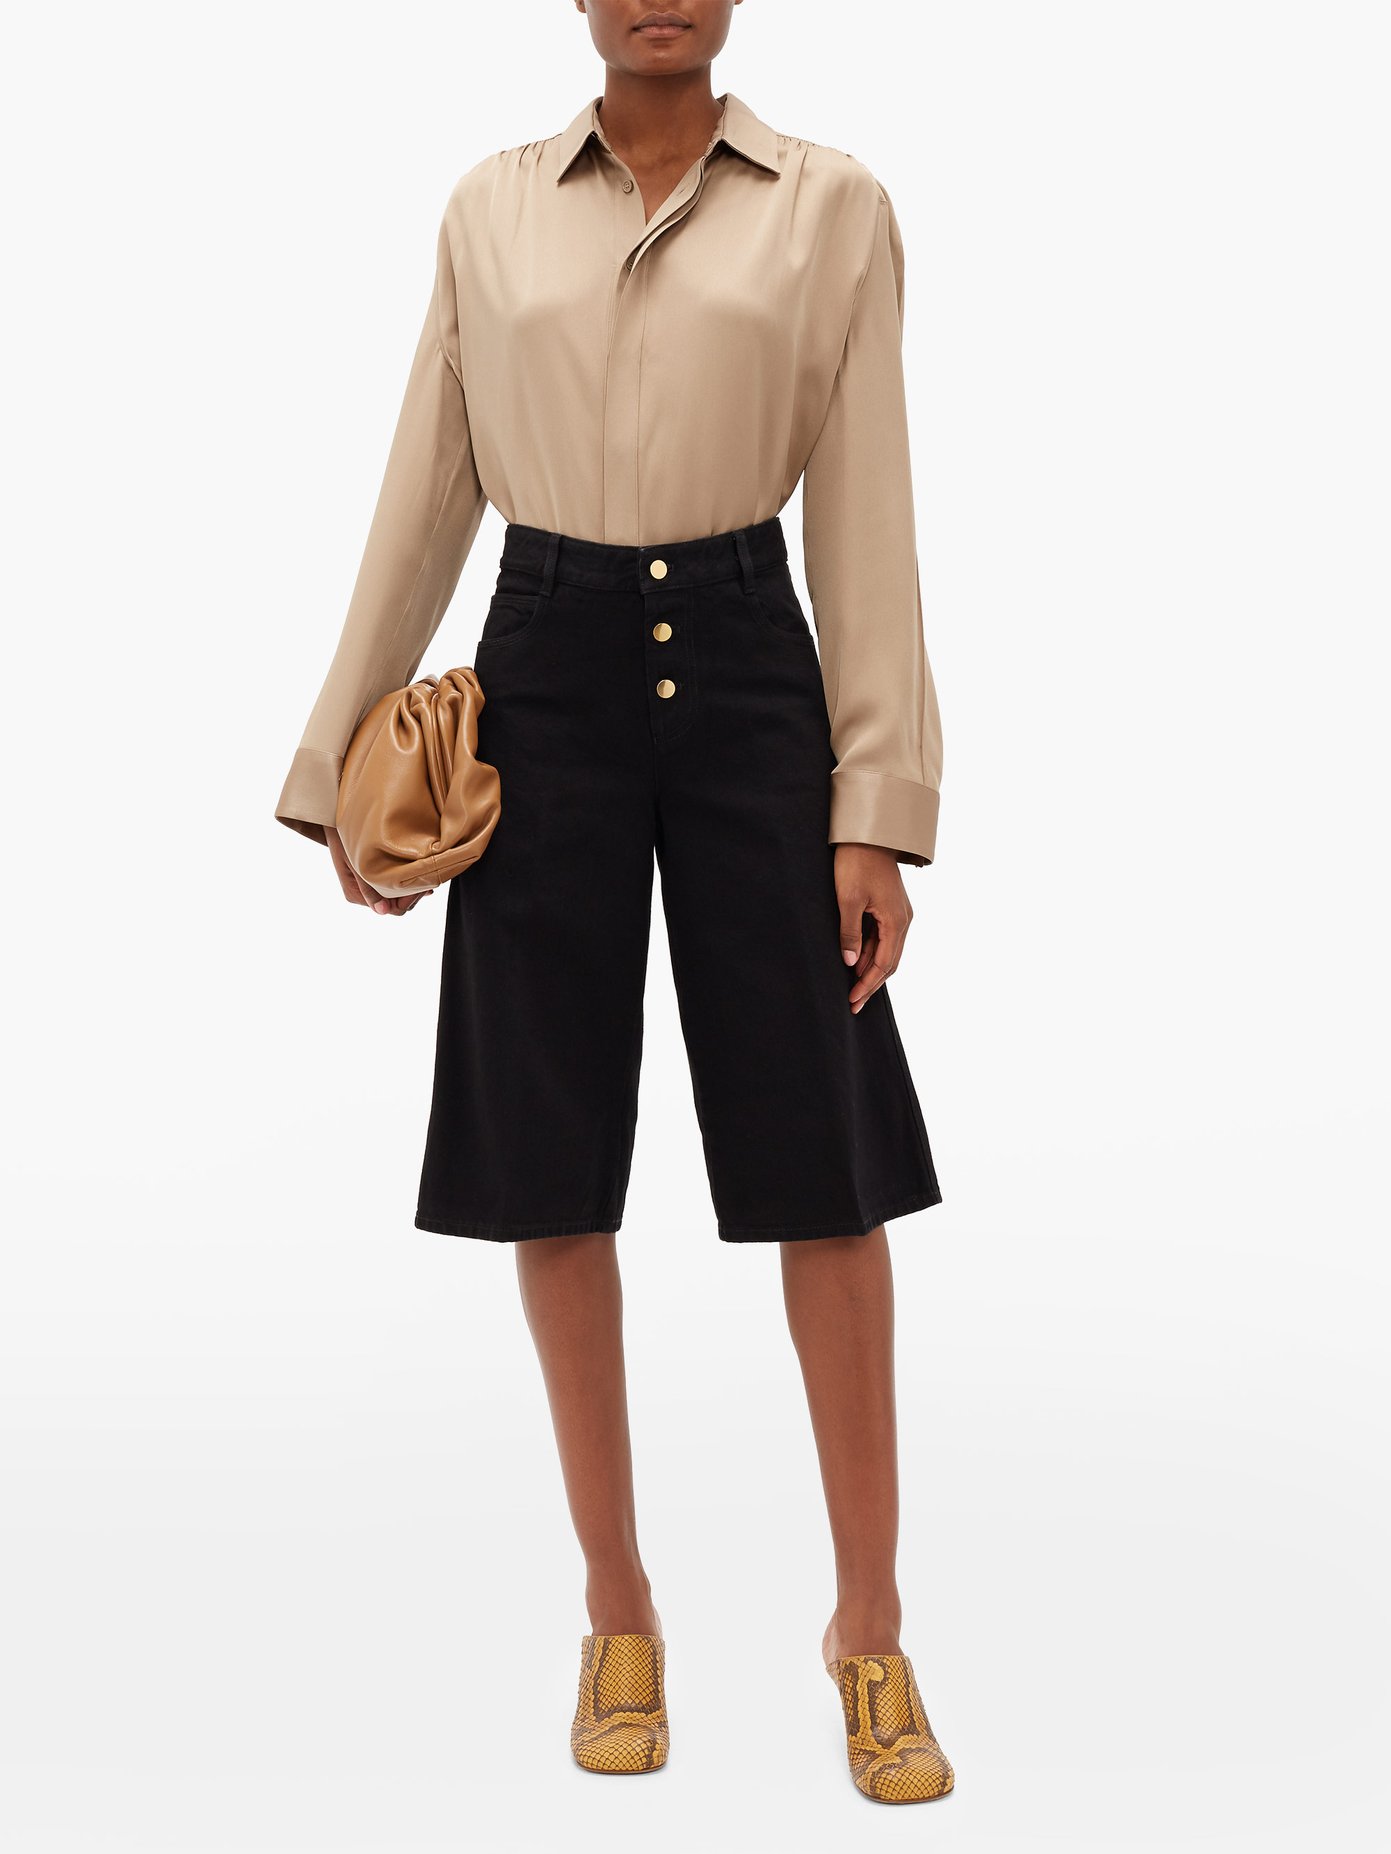 https://assetsprx.matchesfashion.com/img/product/outfit_1347719_1_zoom.jpg